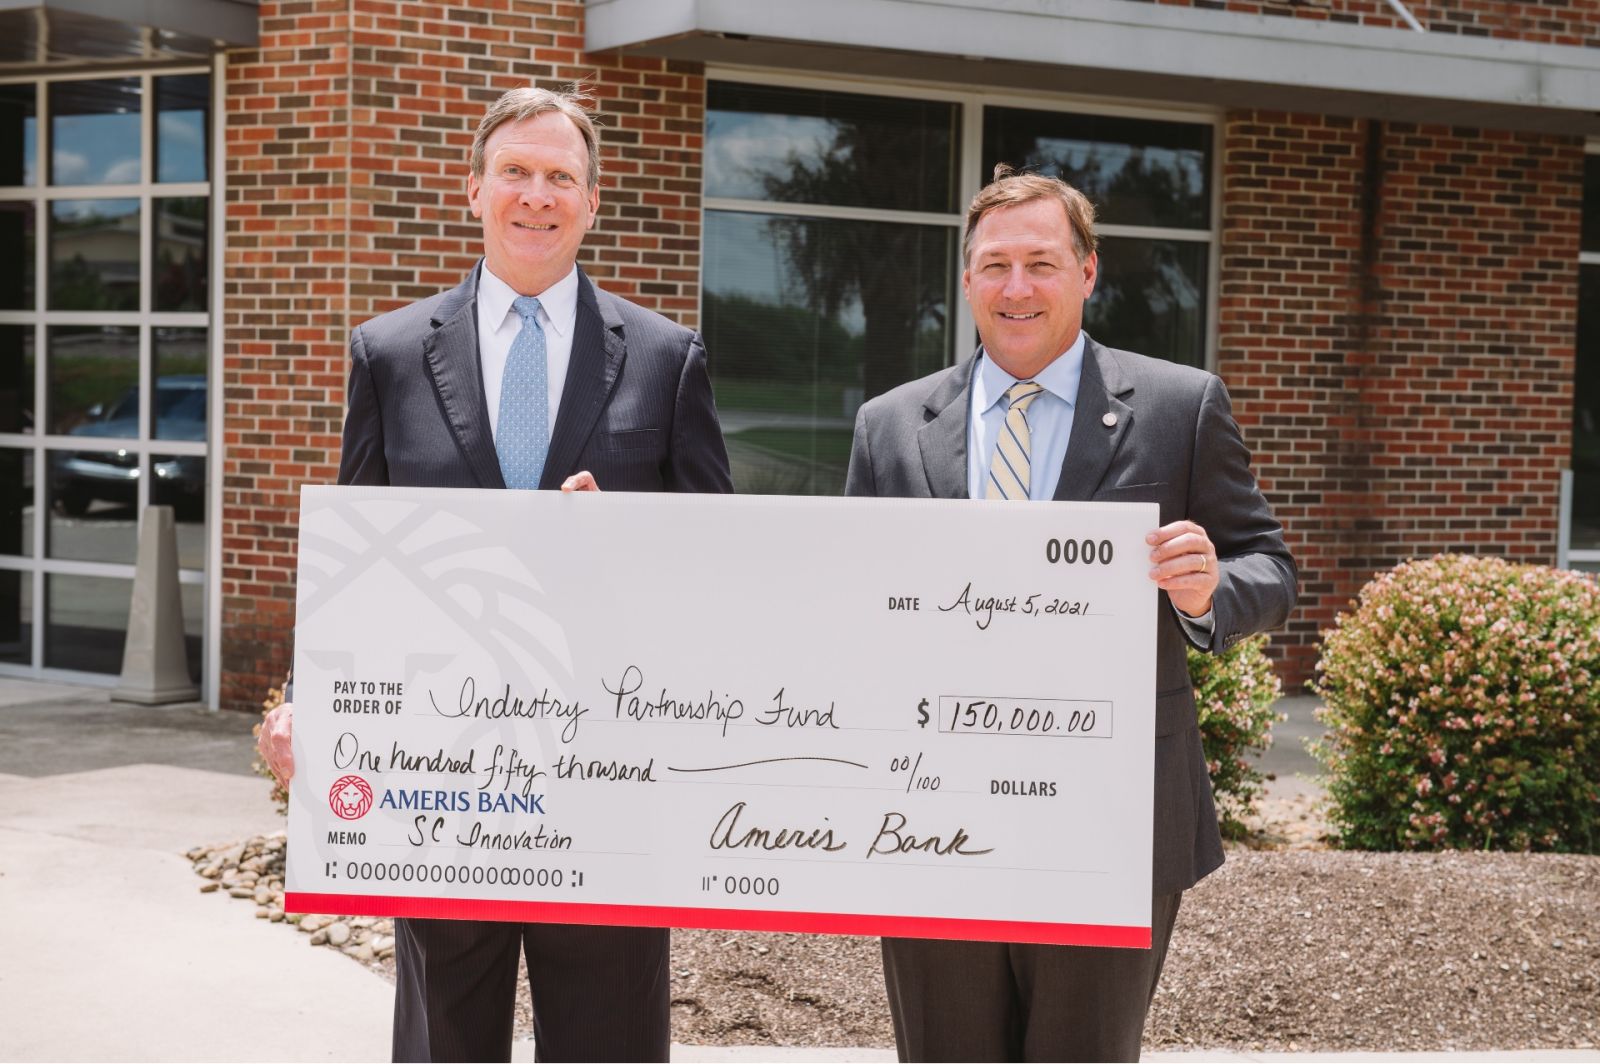 The SCRA has received from Ameris Bank the largest donation ever gifted from a bank in the organization's 38-year history. (Photo/Provided)